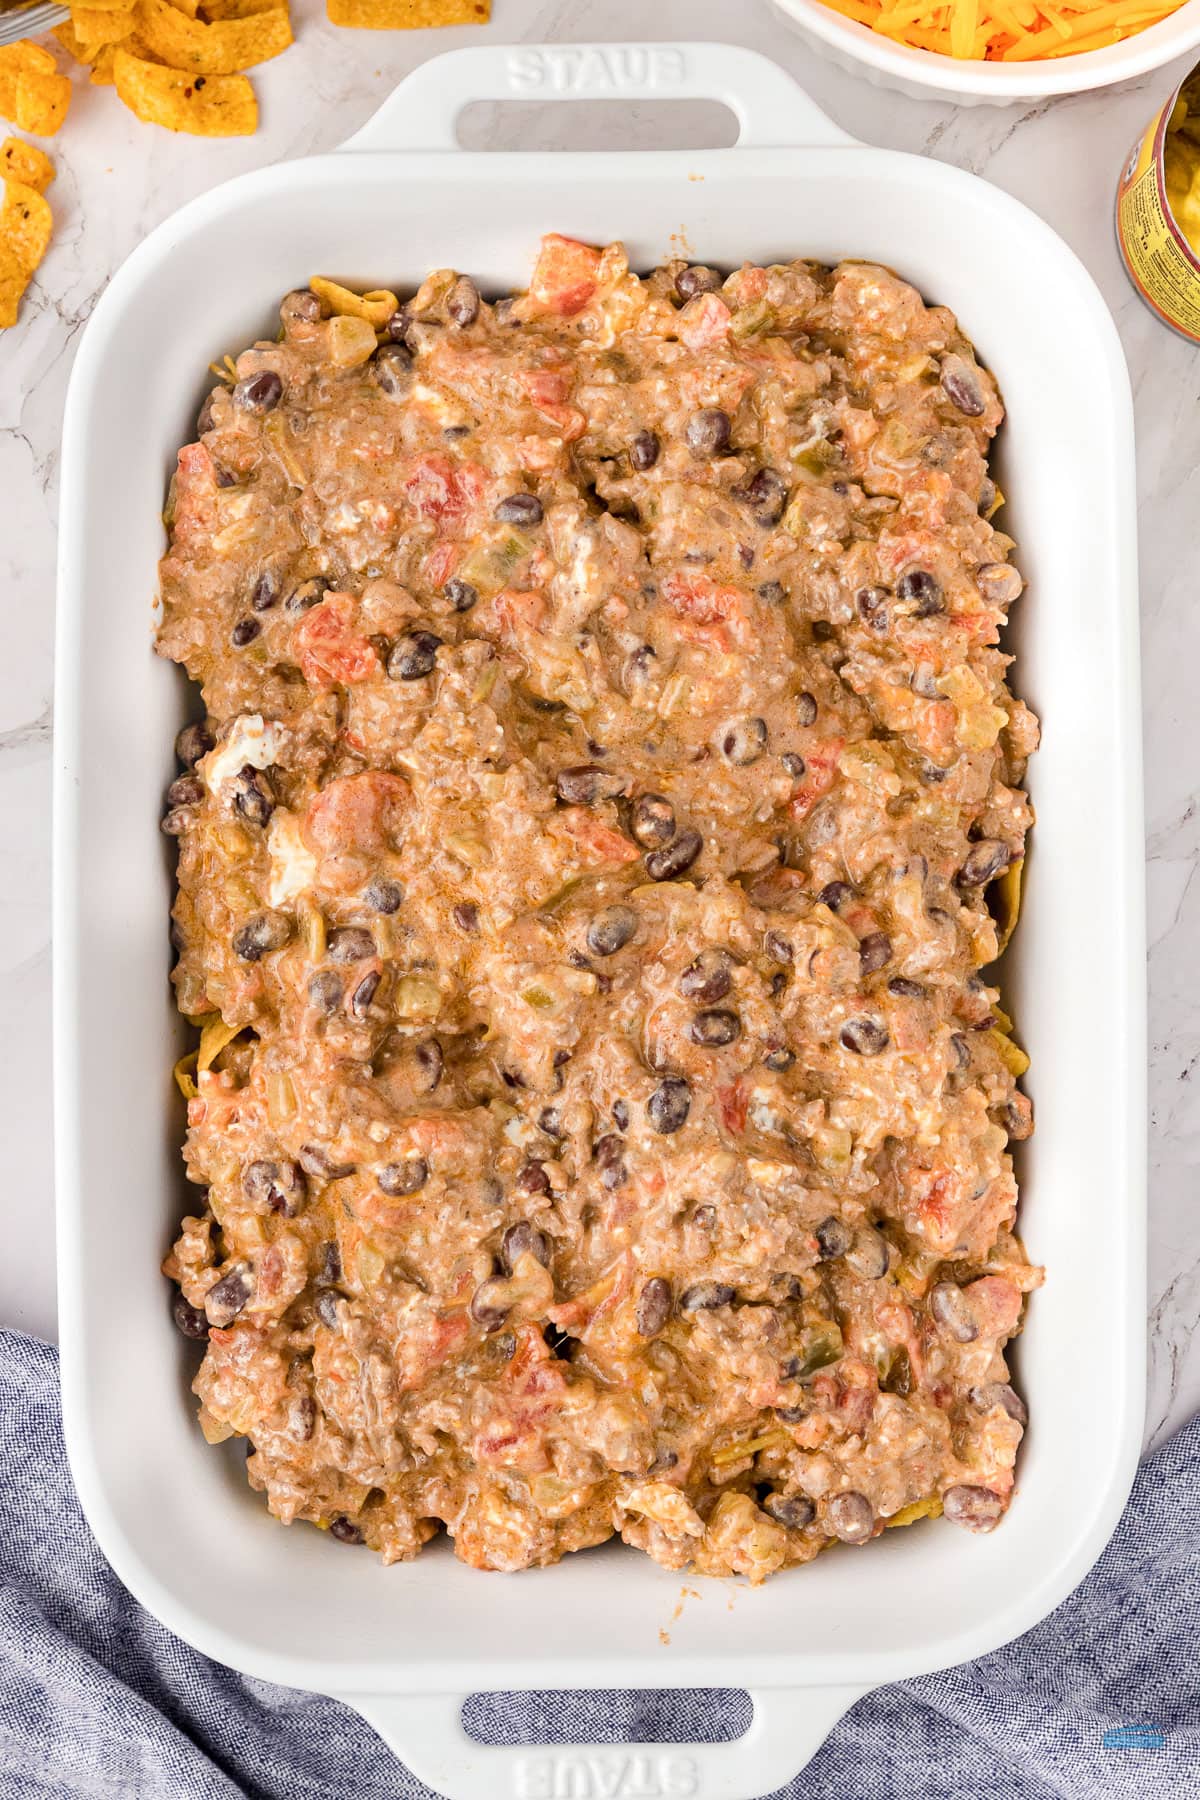 unbaked casserole in a white dish